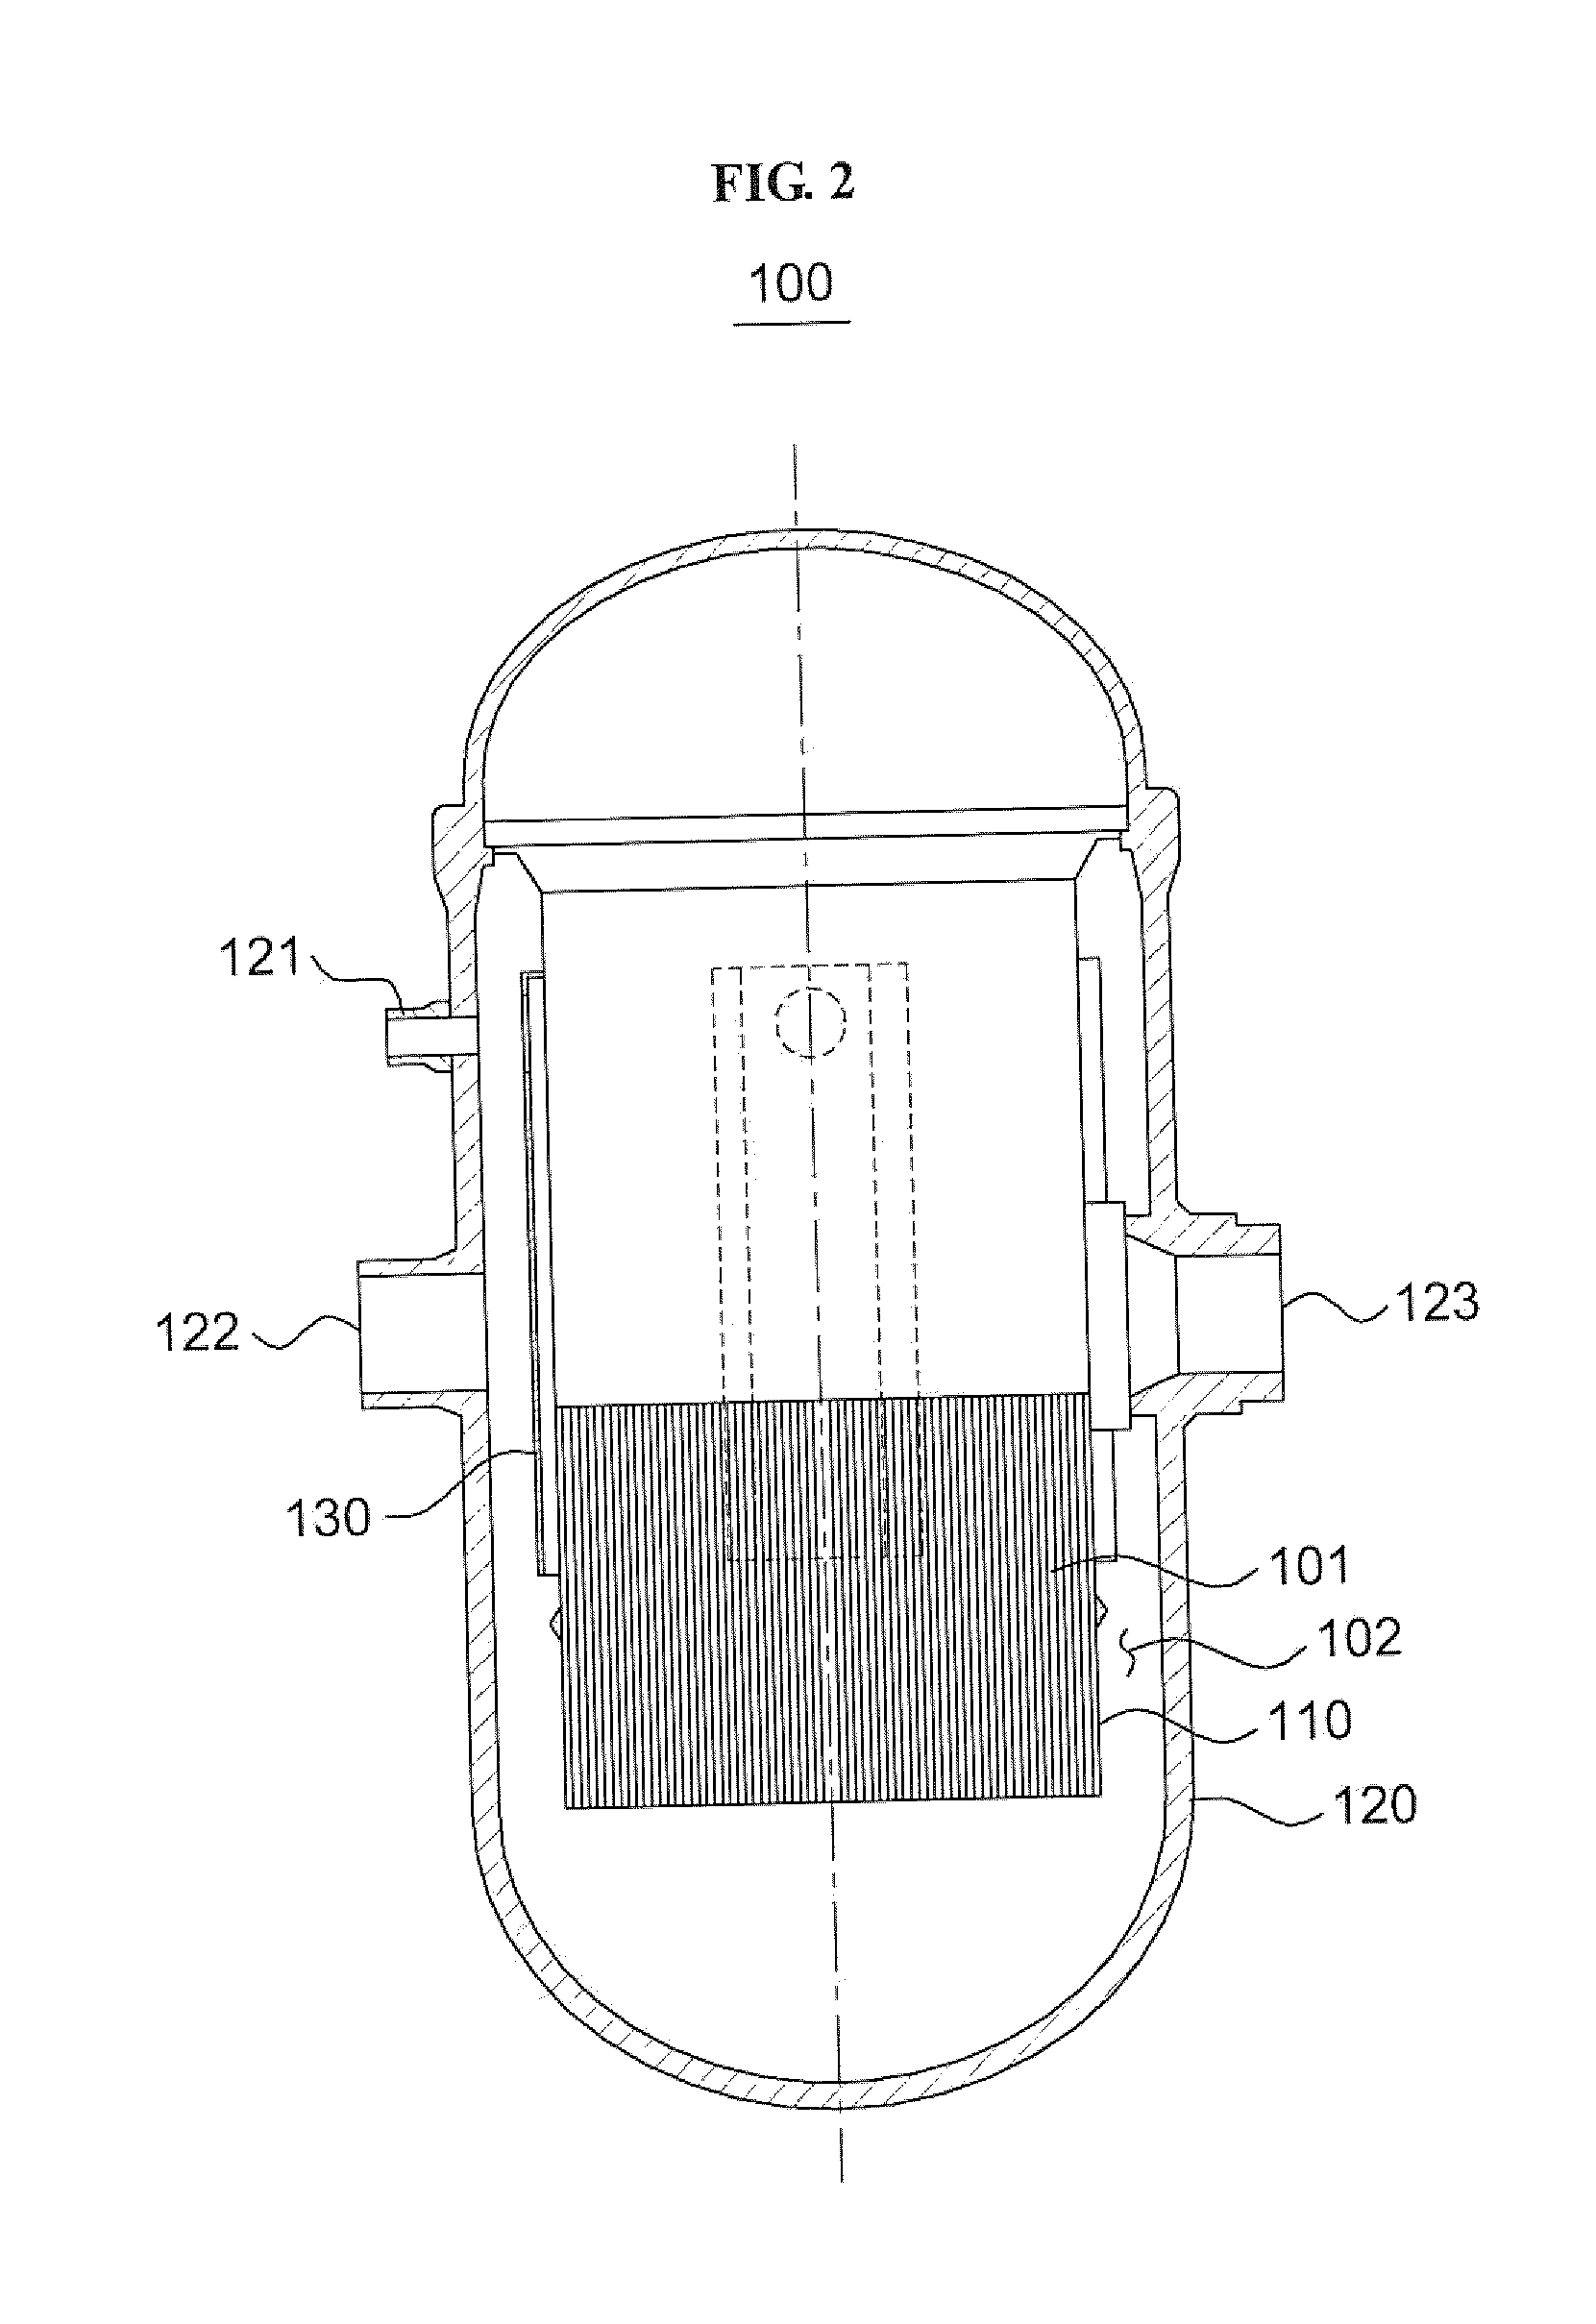 Emergency core cooling duct for emergency core cooling water injection of a nuclear reactor